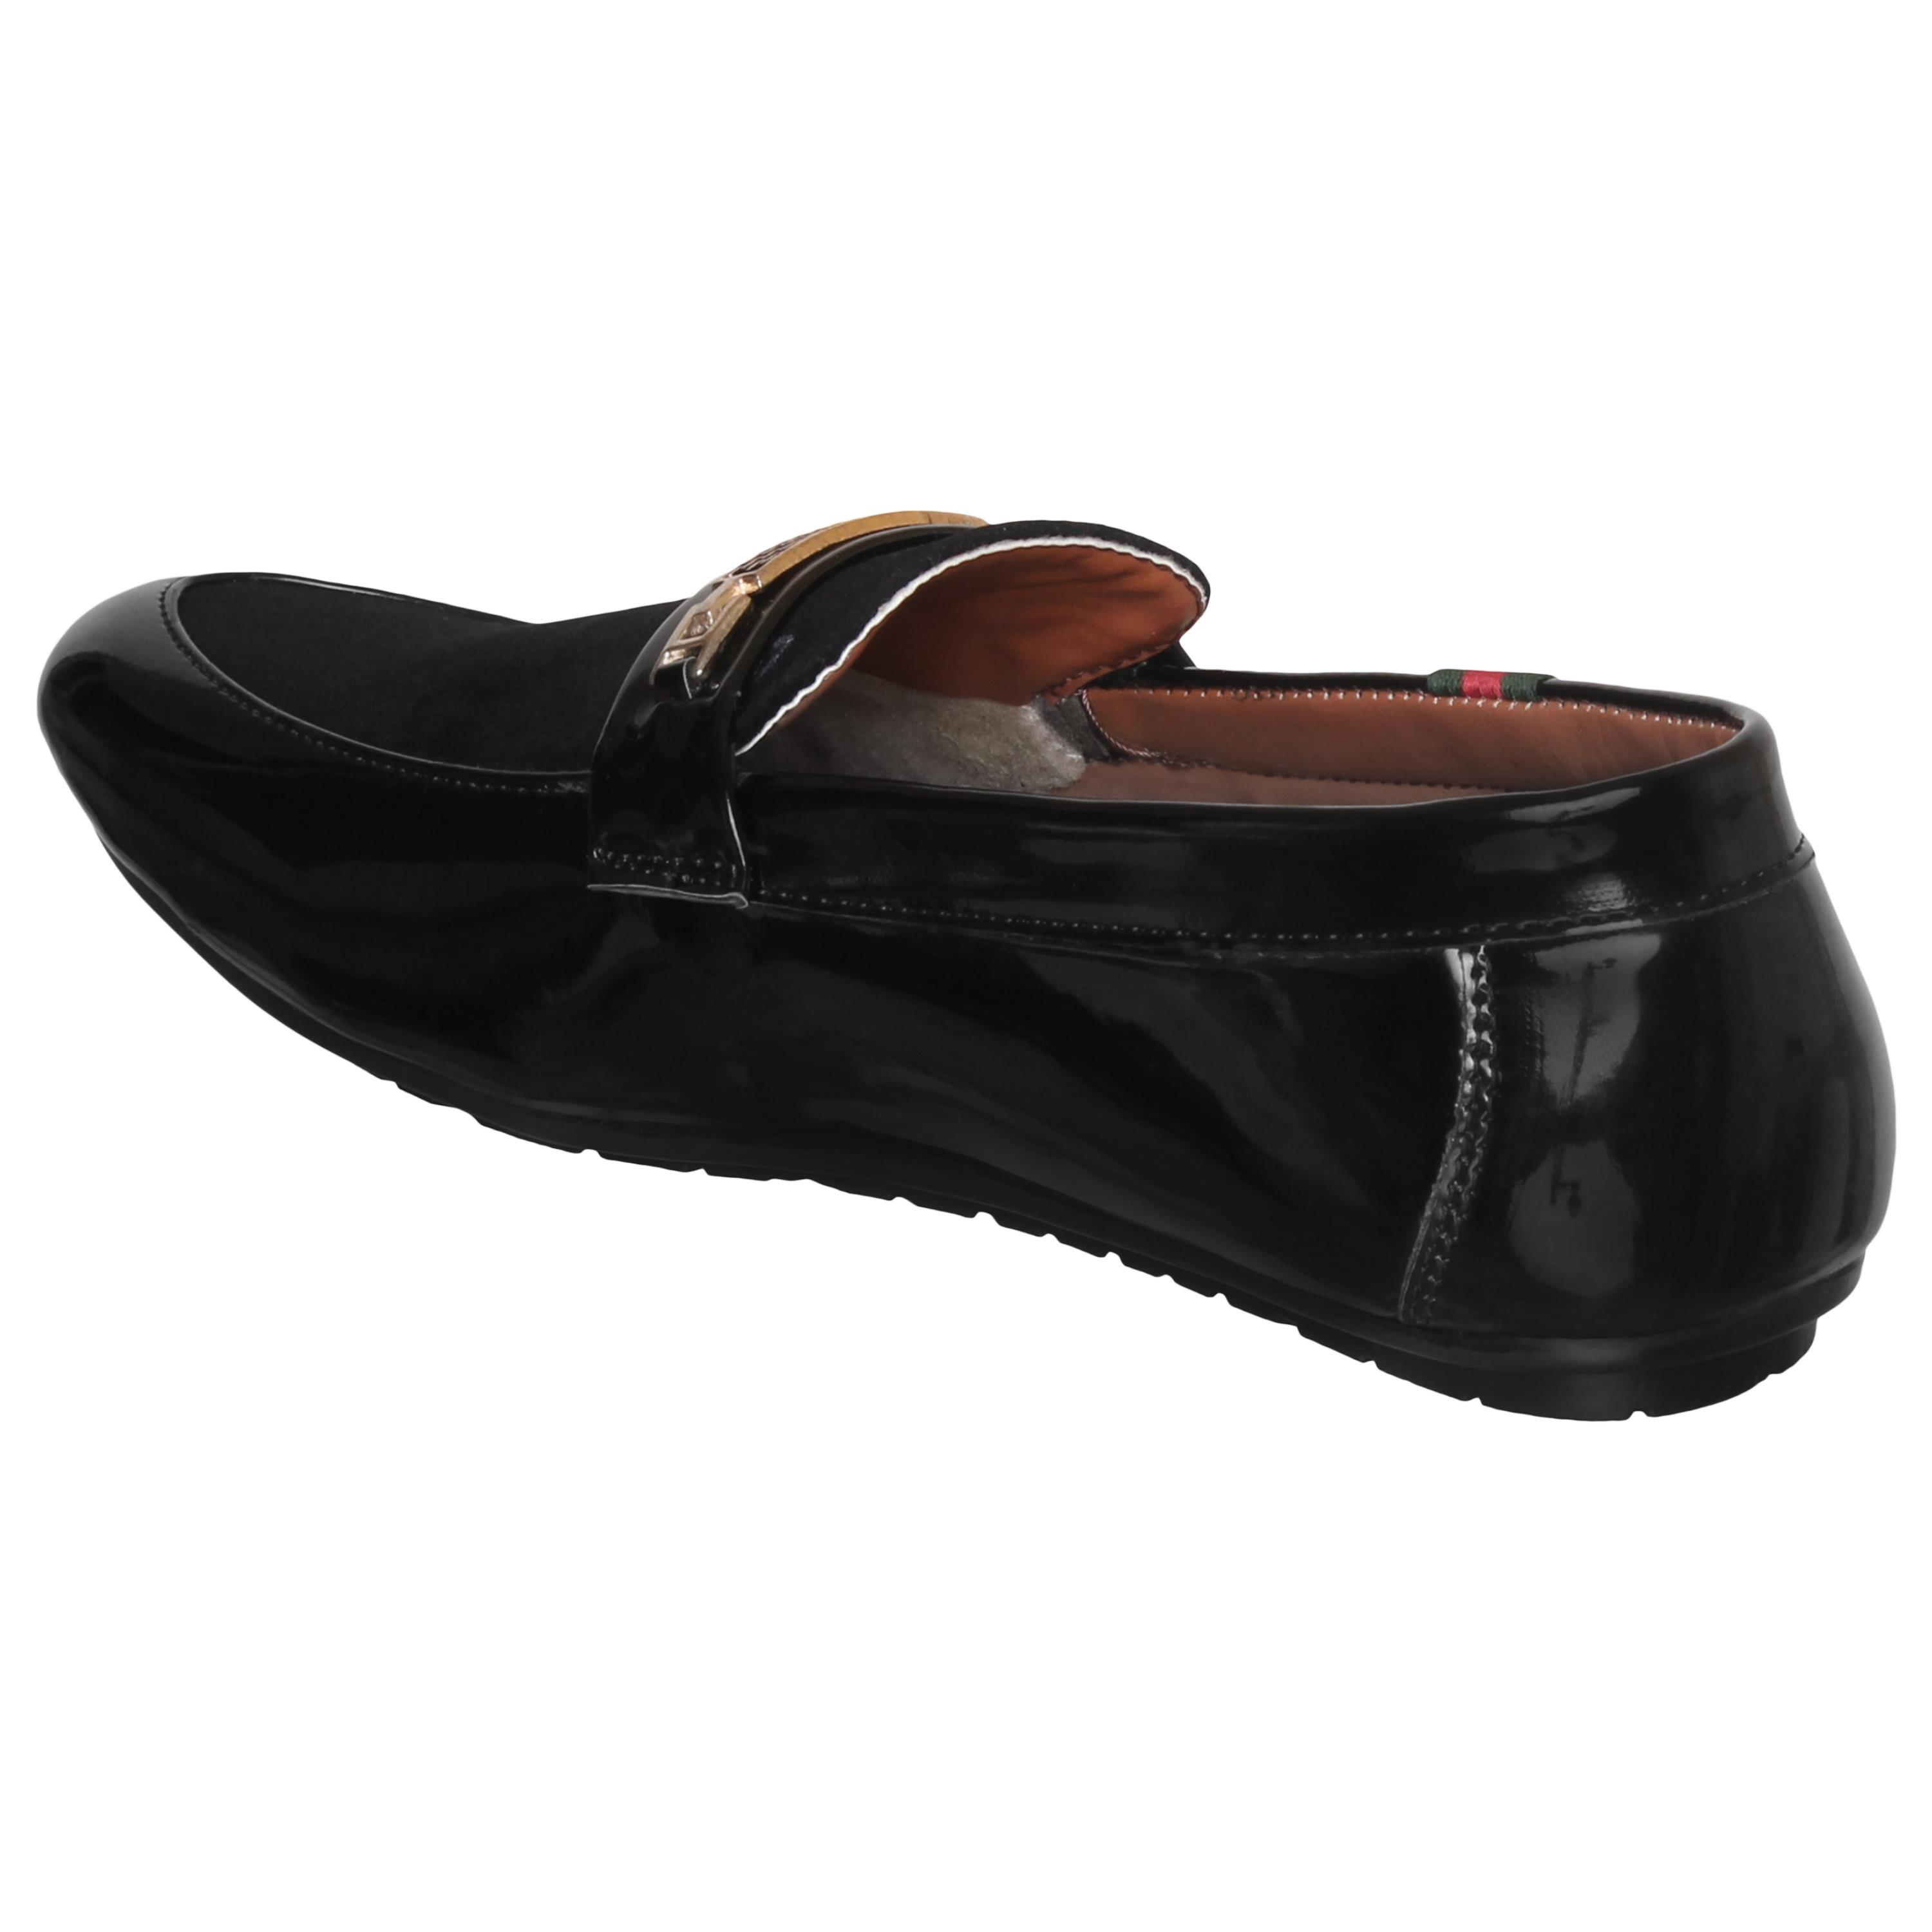 Buy Rexler Corporate Formal Office Shoes Online @ ₹1199 from ShopClues